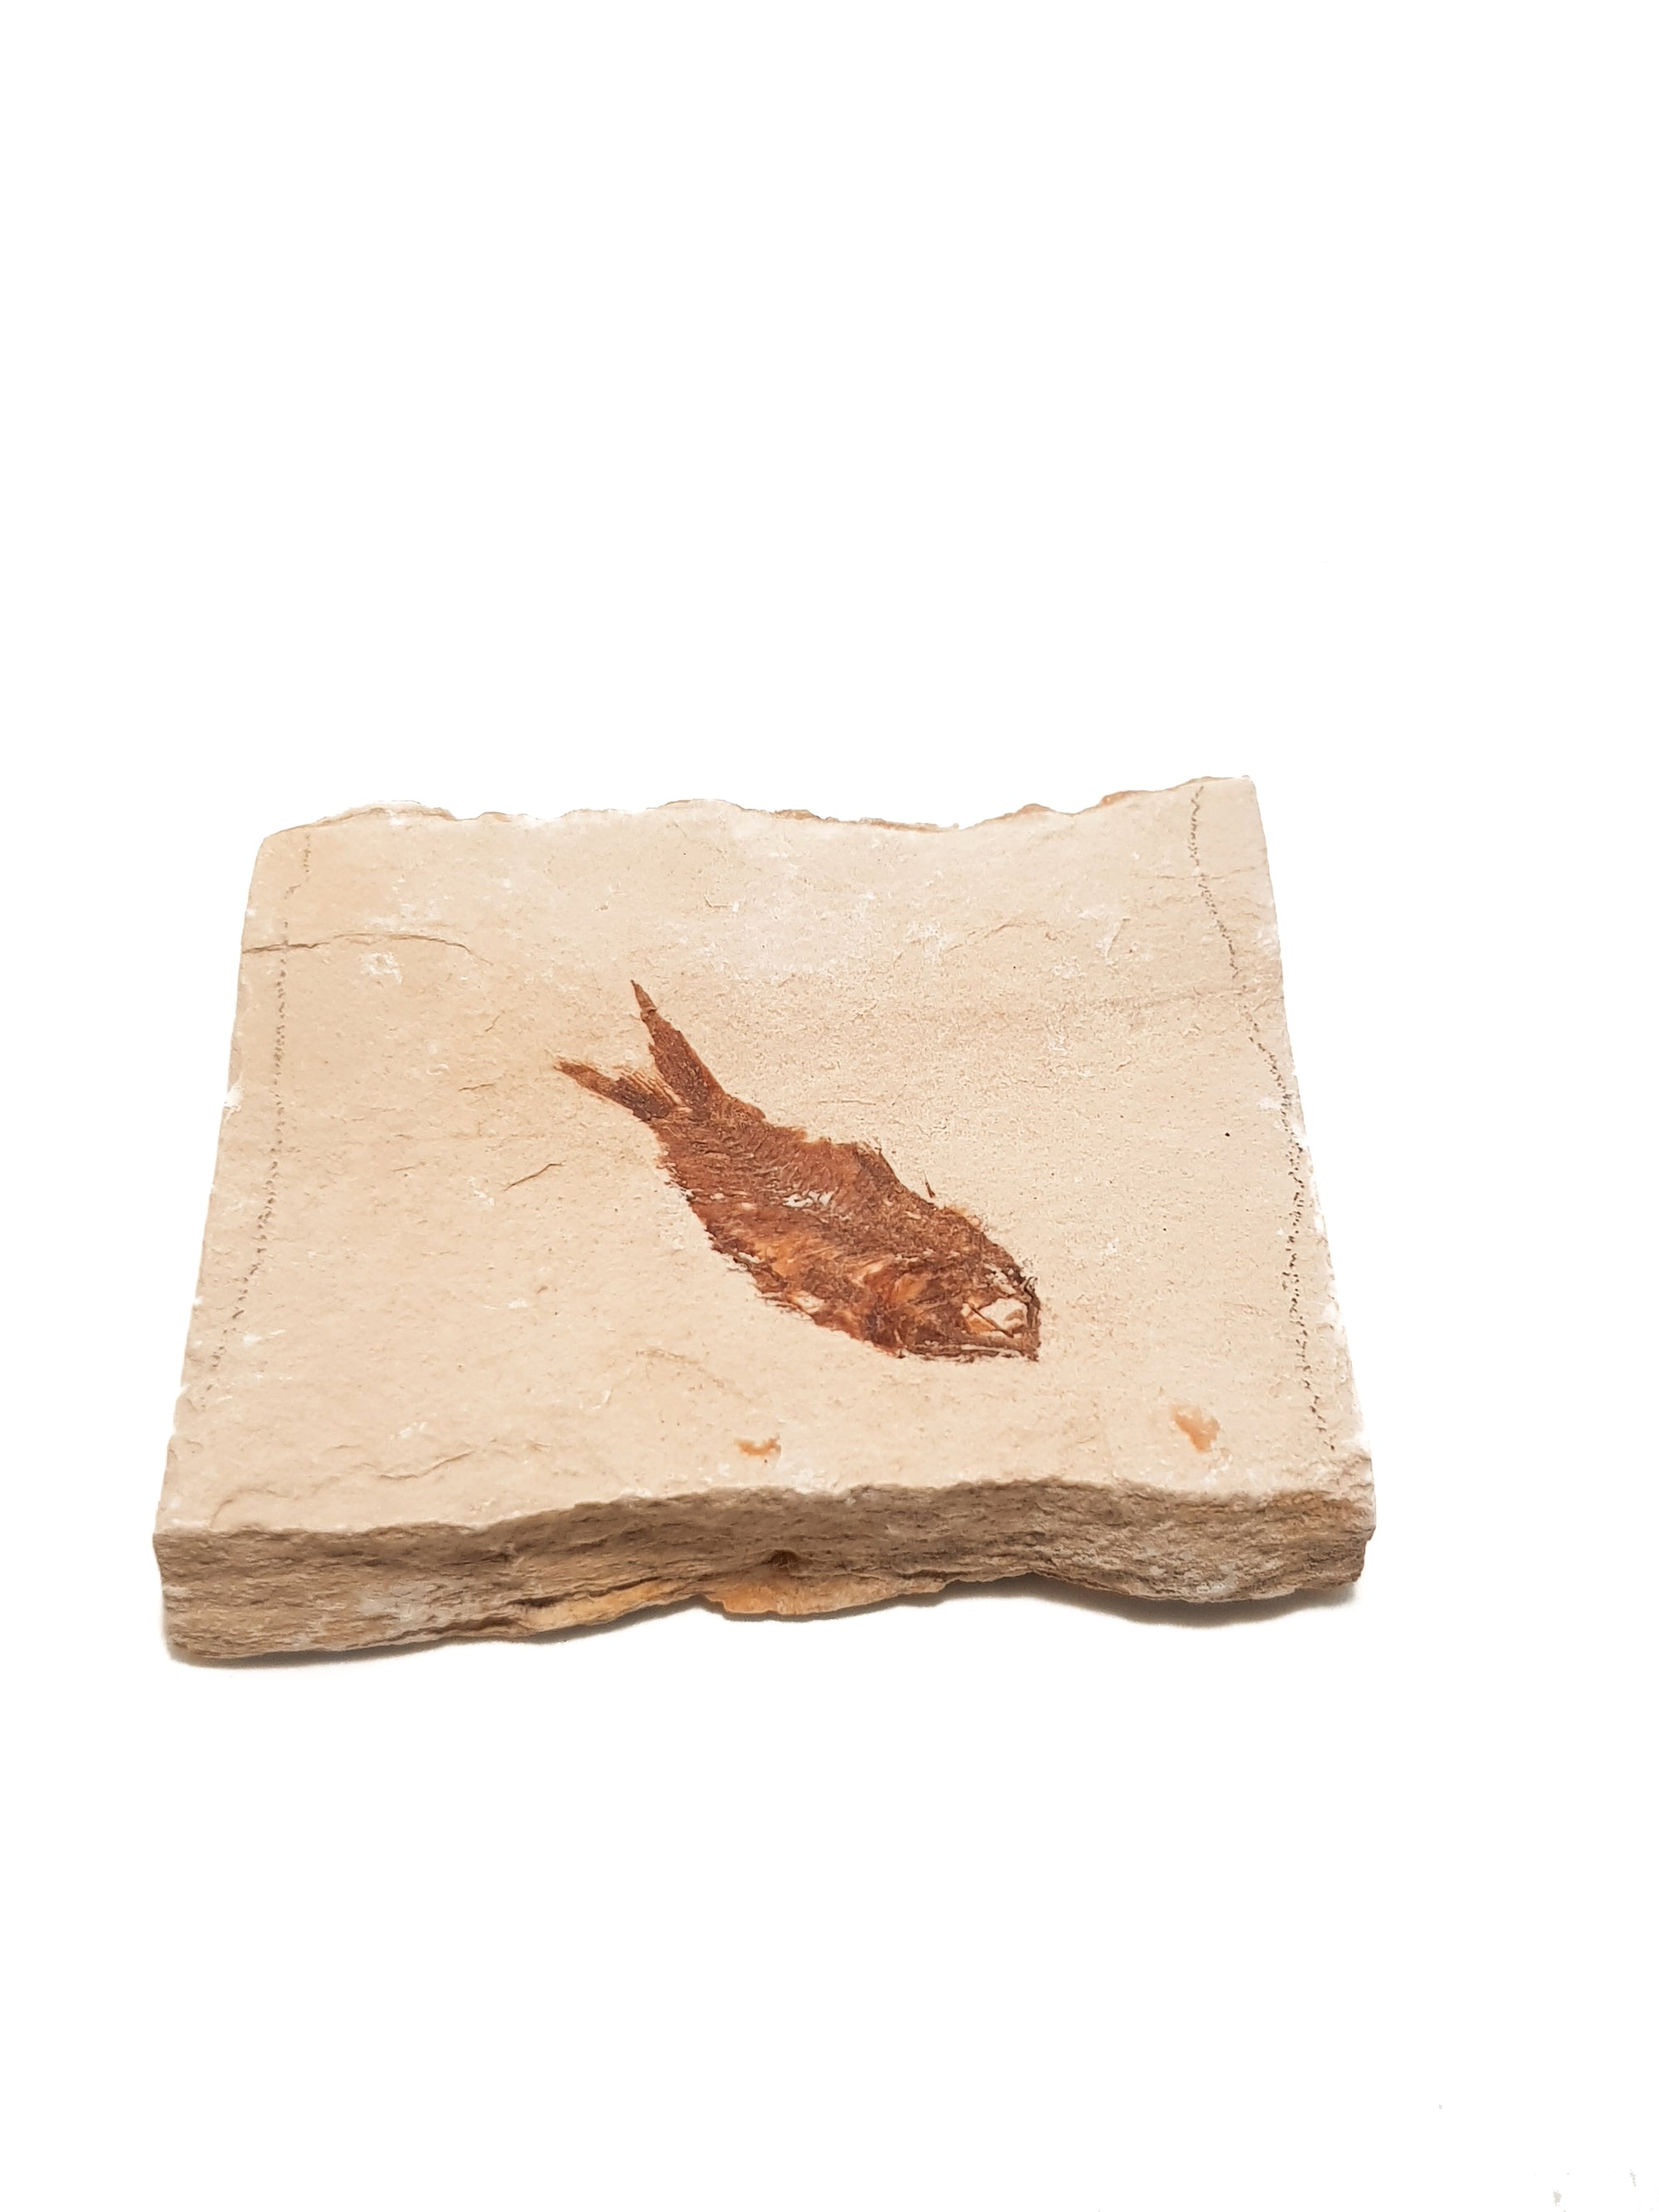 Fossil fish in limestone. The edges of the limestone are laminated. The fish is very complete, both the bones and preserved flesh are brown. Details of the back bone and the eye socket are clearly visible. There are no signs of repair